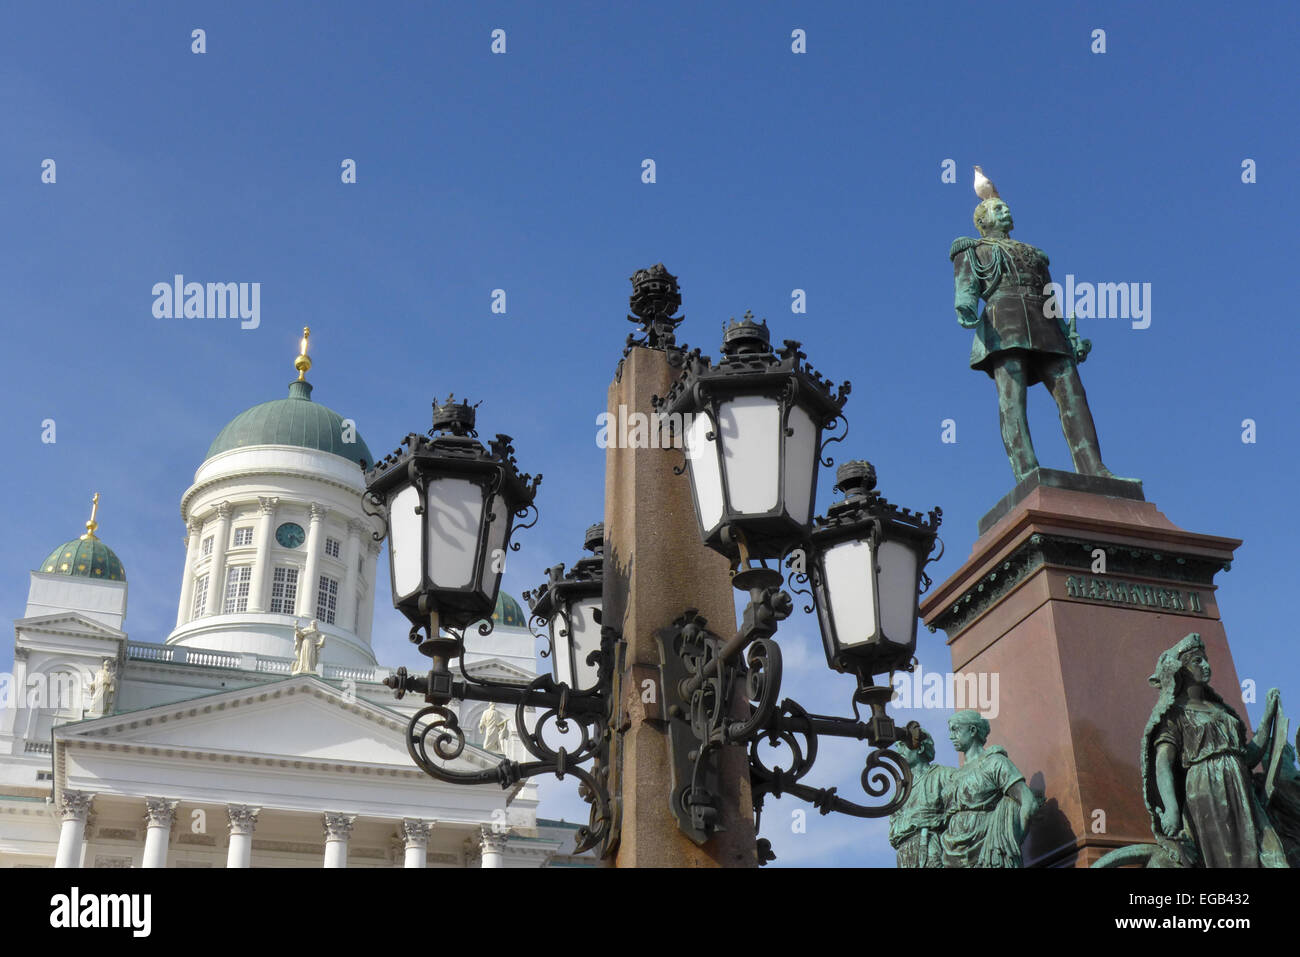 Senate Square in Helsinki with the Cathedral and the statue of Emperor Alexander 11 of Russia. Stock Photo